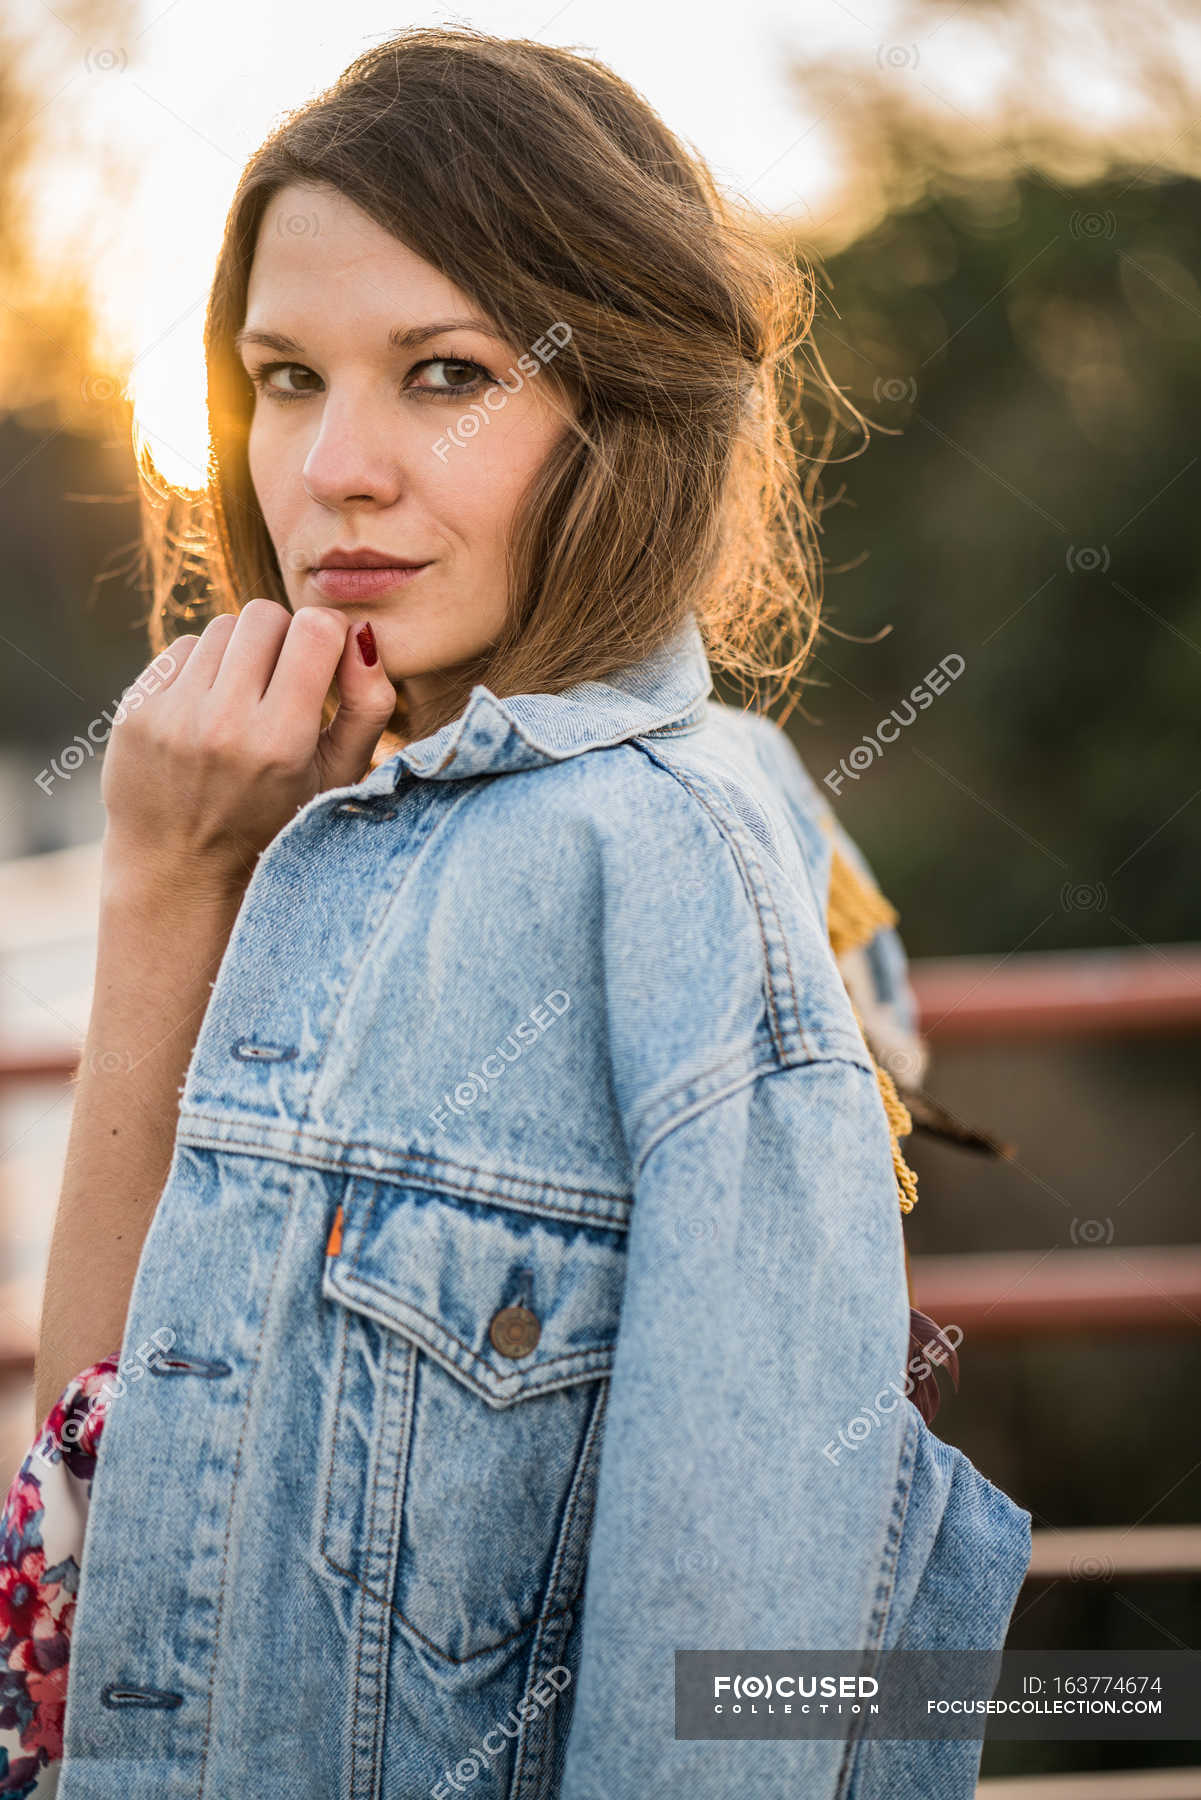 Pasen synoniemenlijst Snel Young female posing in jeans jacket — youth, stylish - Stock Photo |  #163774674